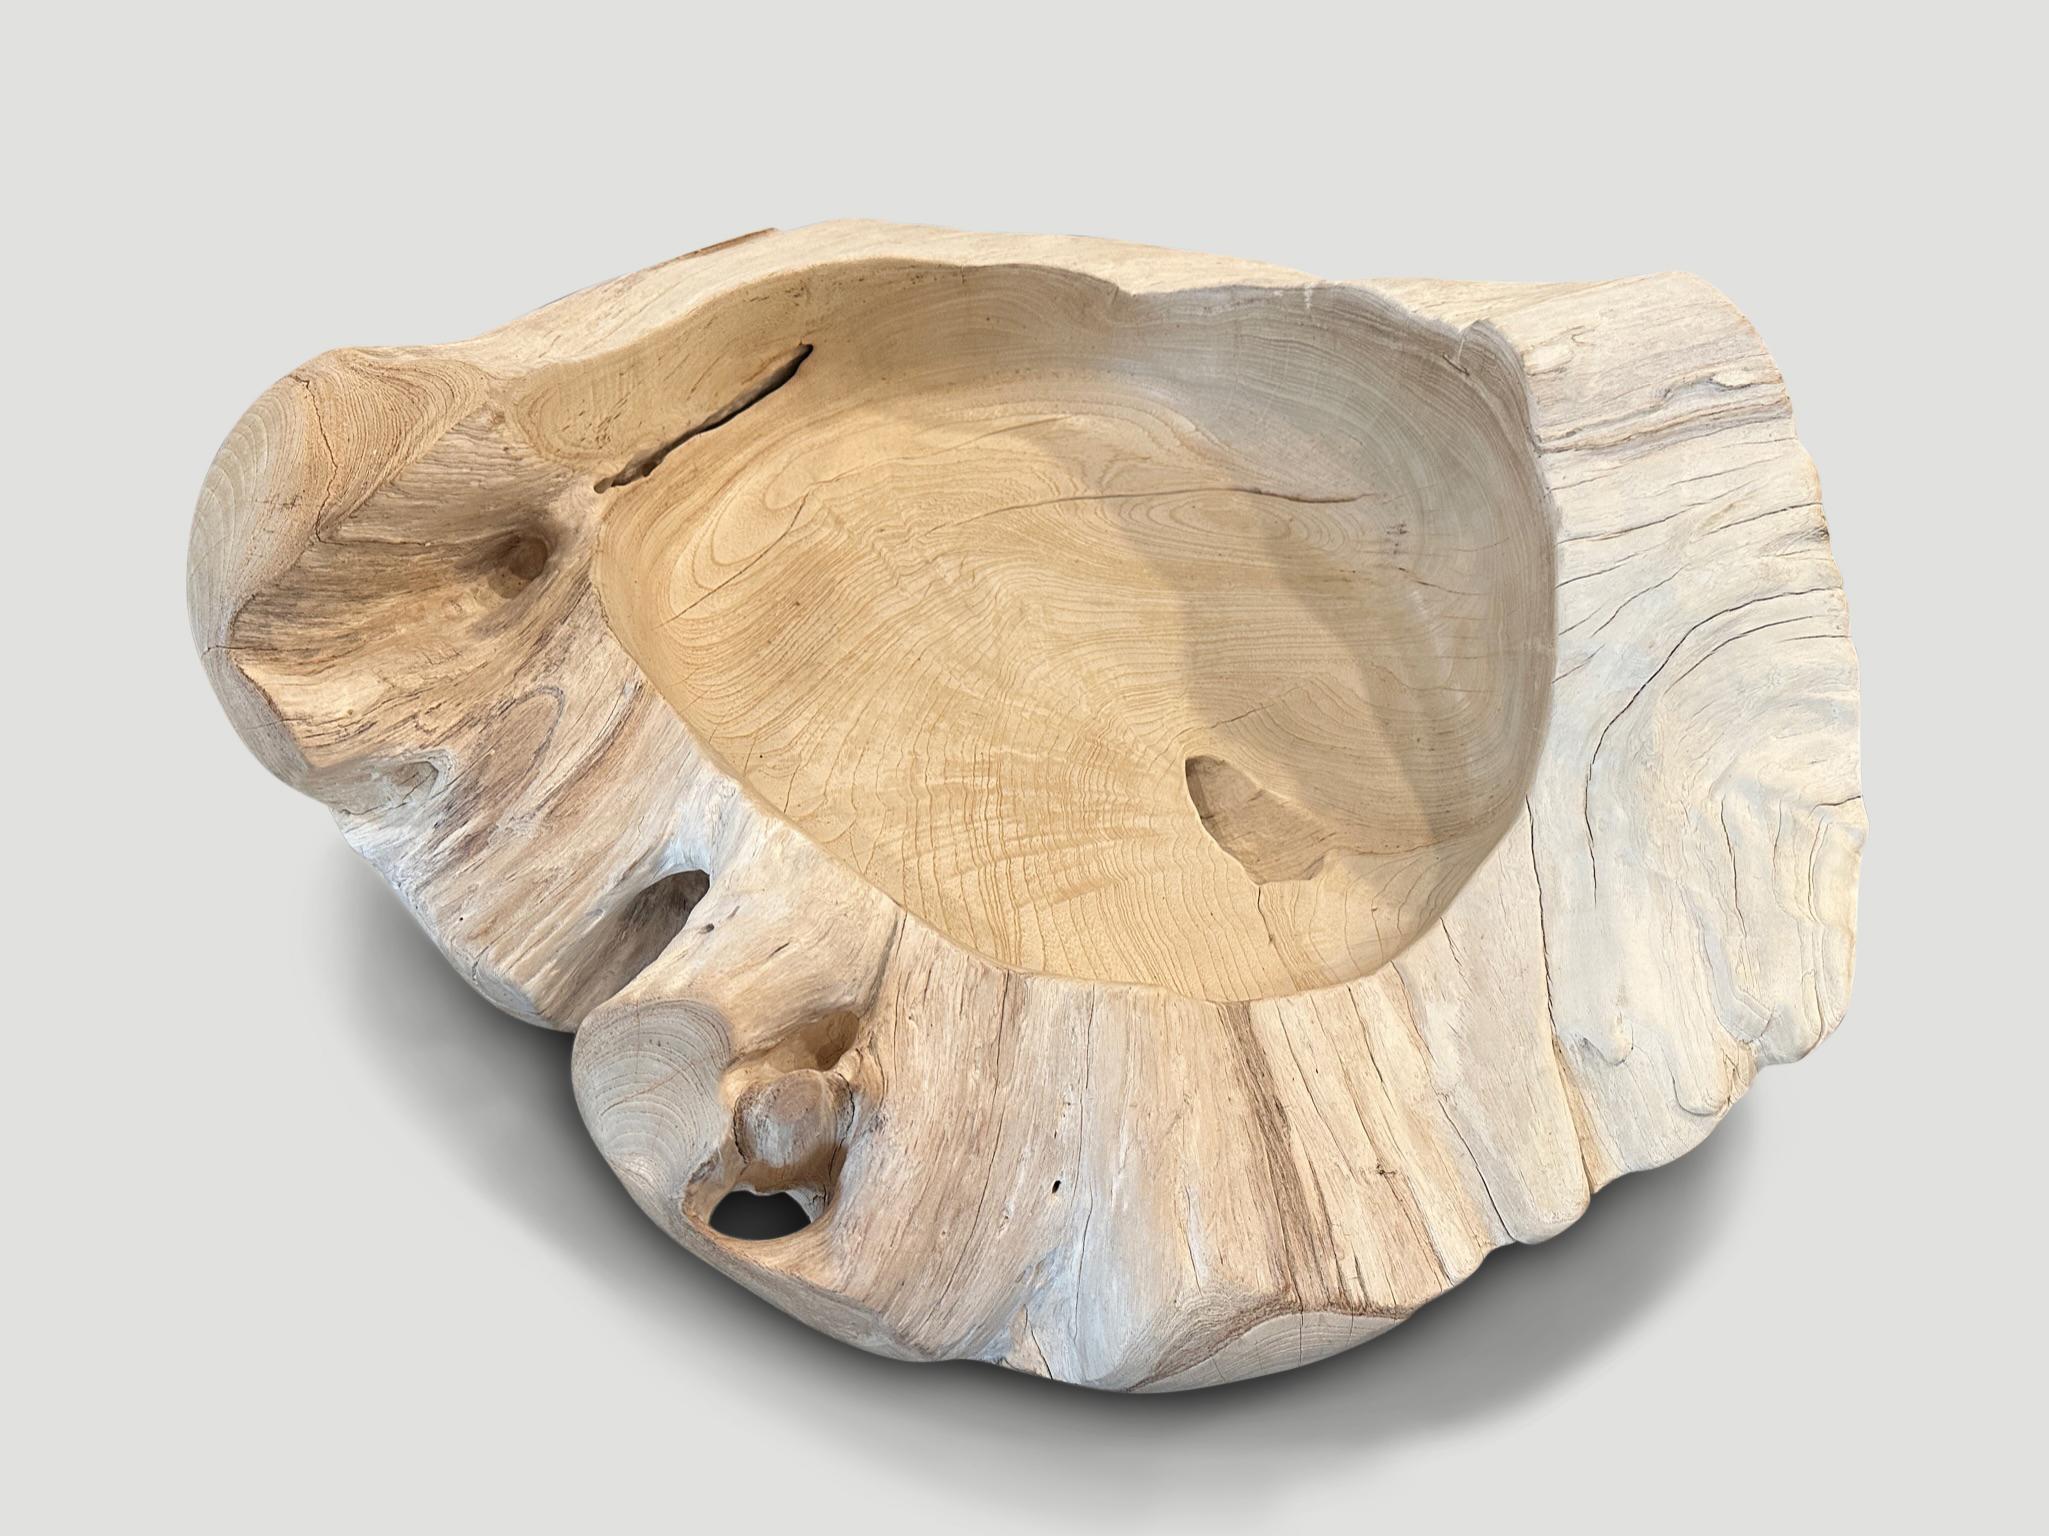 Impressive size on this reclaimed teak sculptural vessel. Hand carved from a single piece of reclaimed teak wood and bleached with a smooth finish. We added a polish to the inner section as protection and for a little contrast and also to the smooth